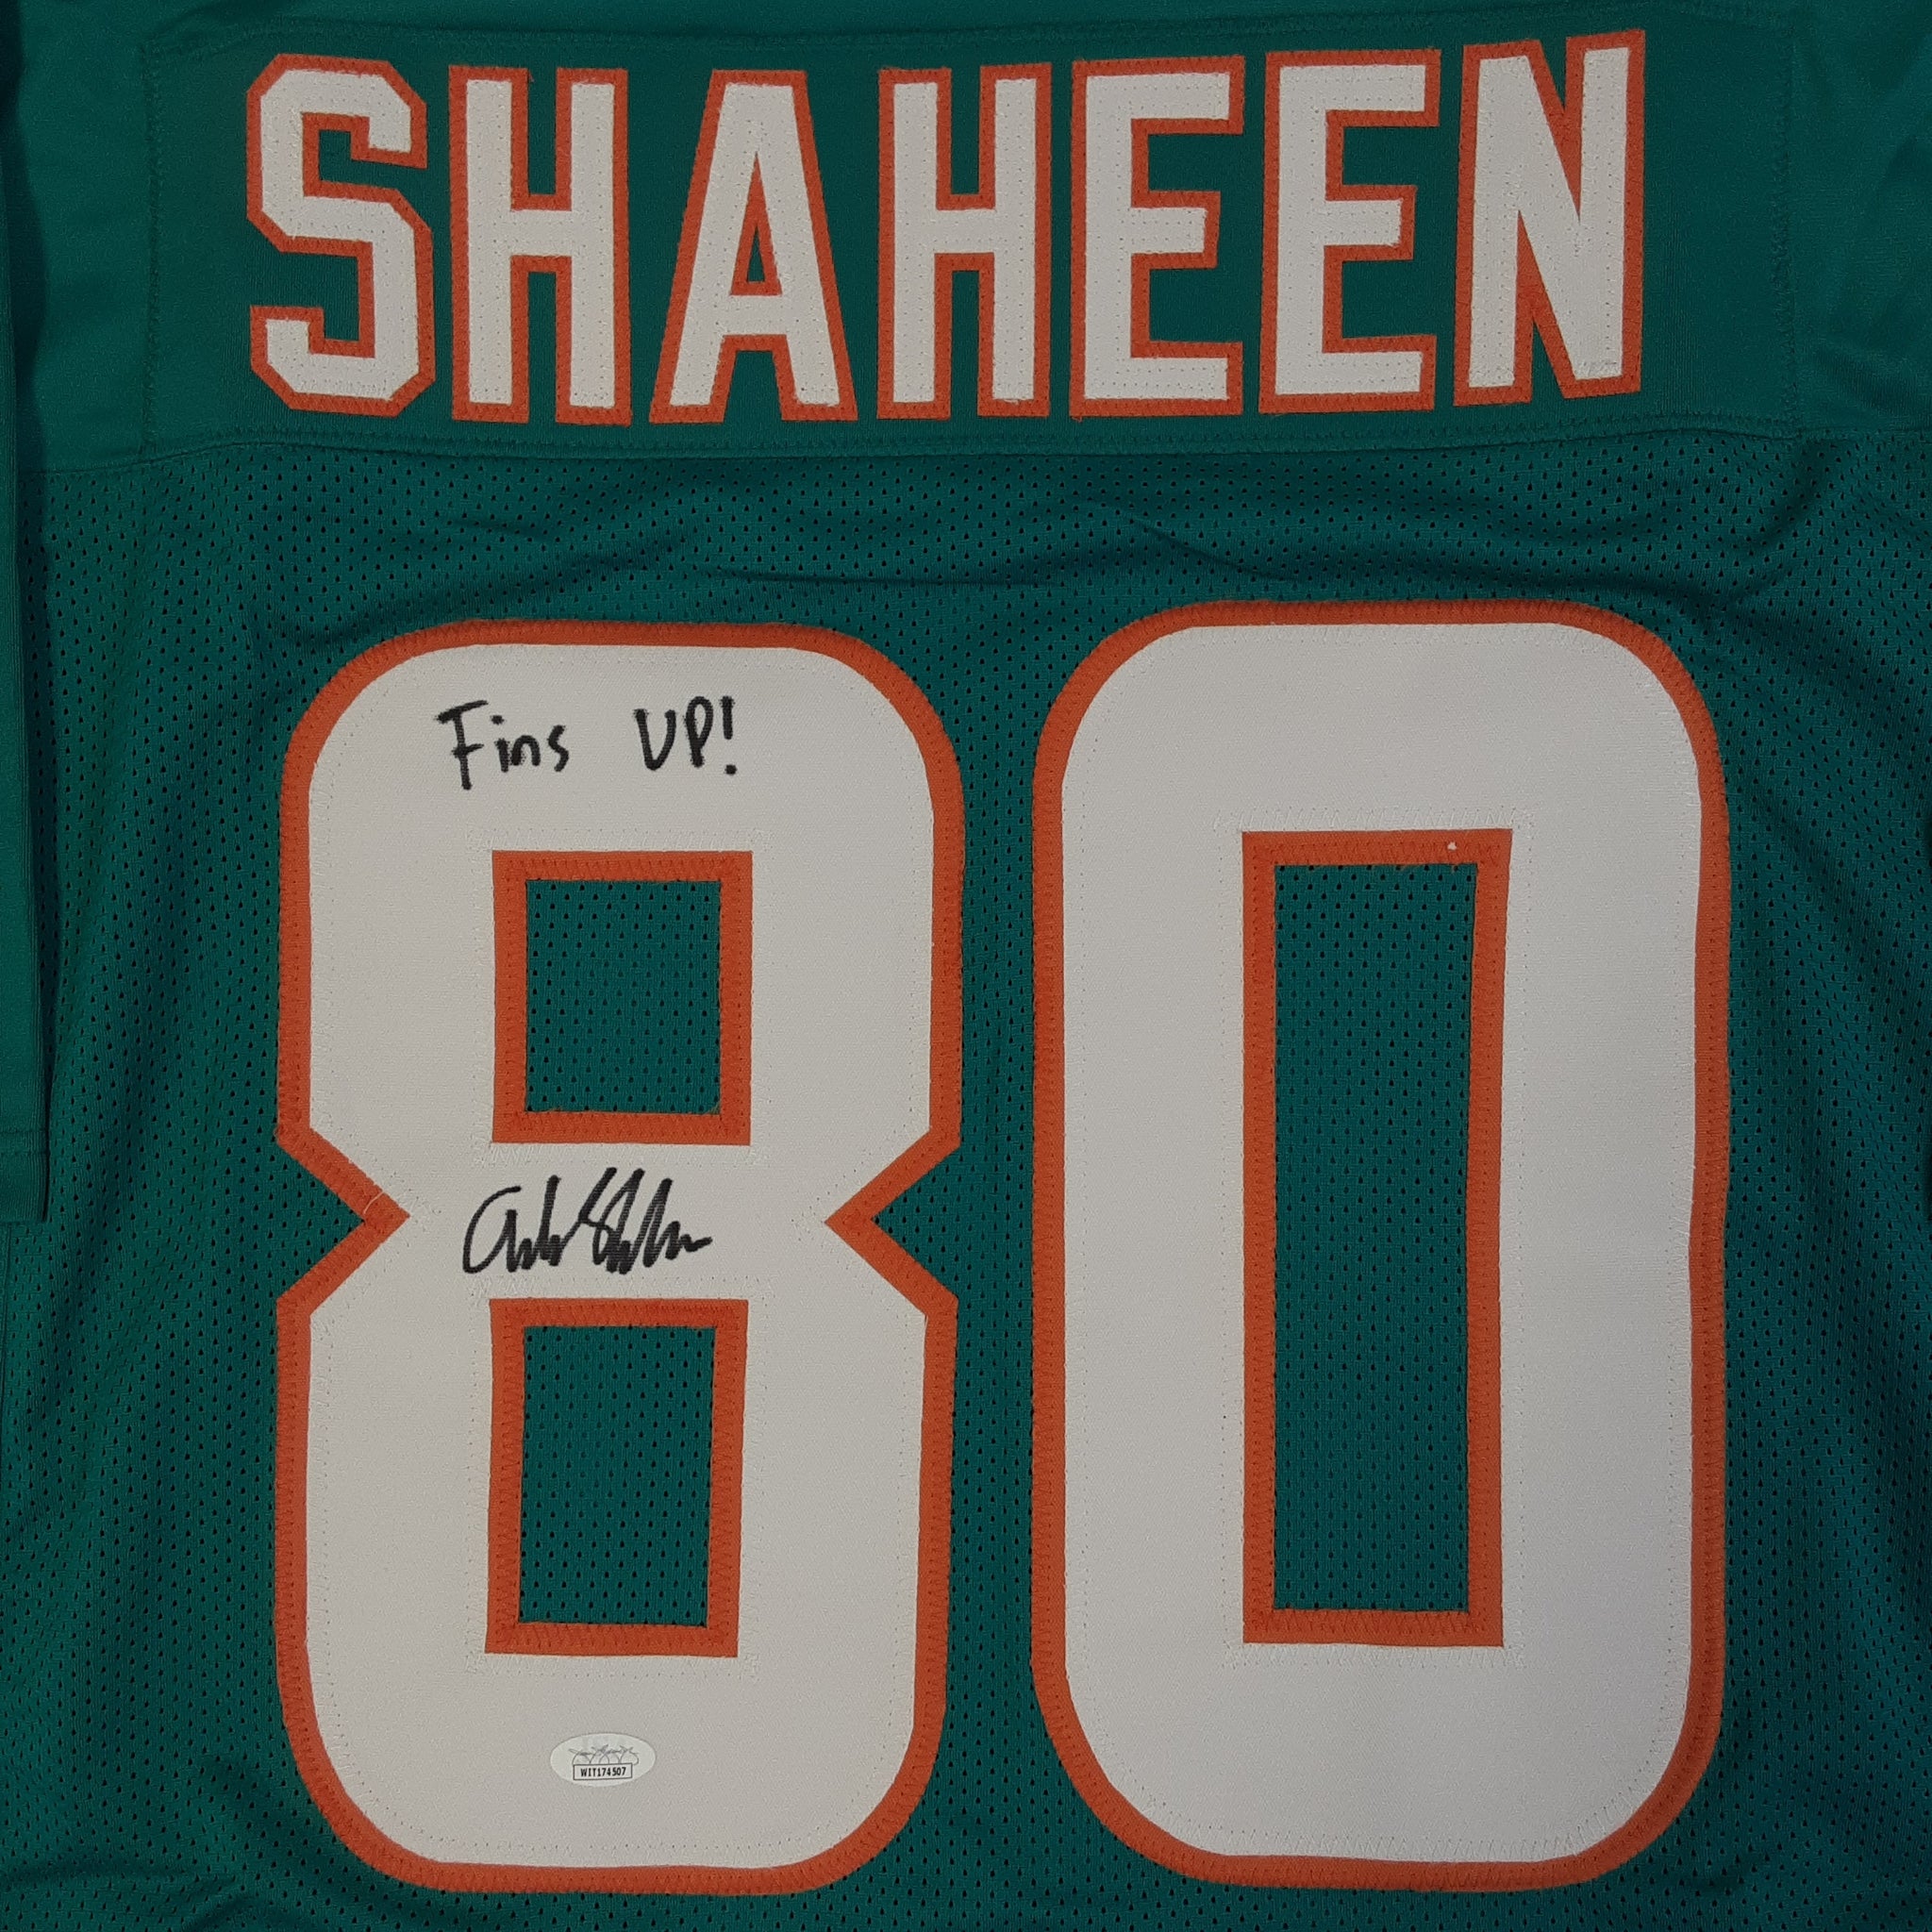 Adam Shaheen Authentic Signed & Inscribed Pro Style Jersey Autographed JSA